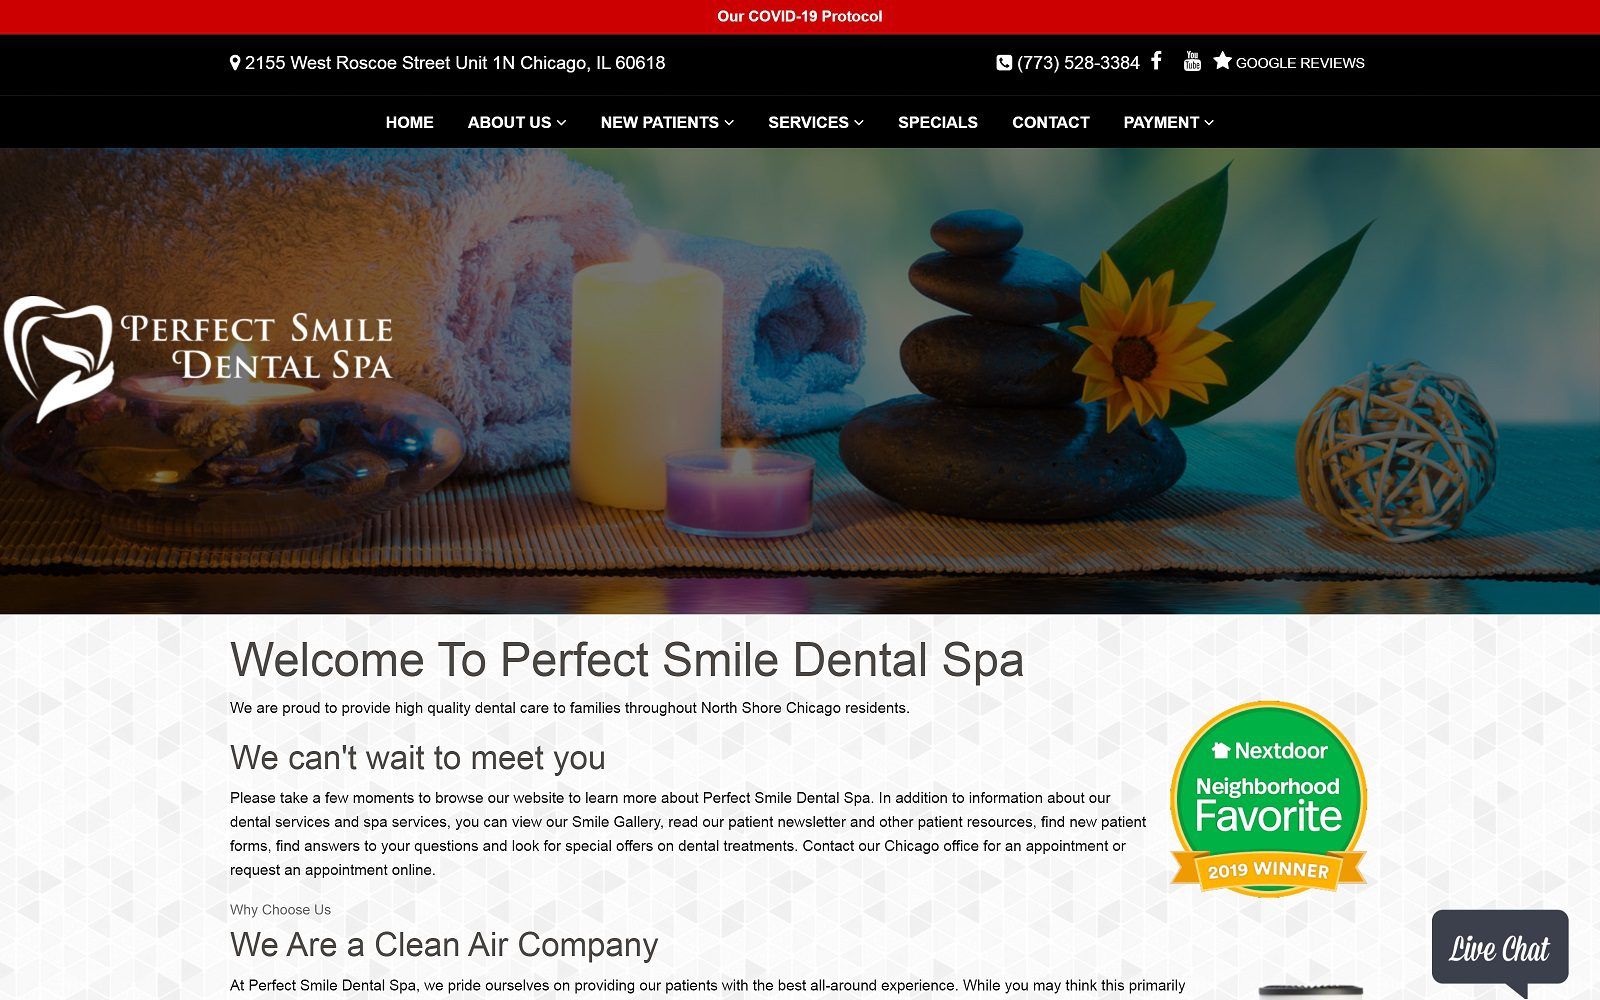 The Screenshot of Perfect Smile Dental Spa Website